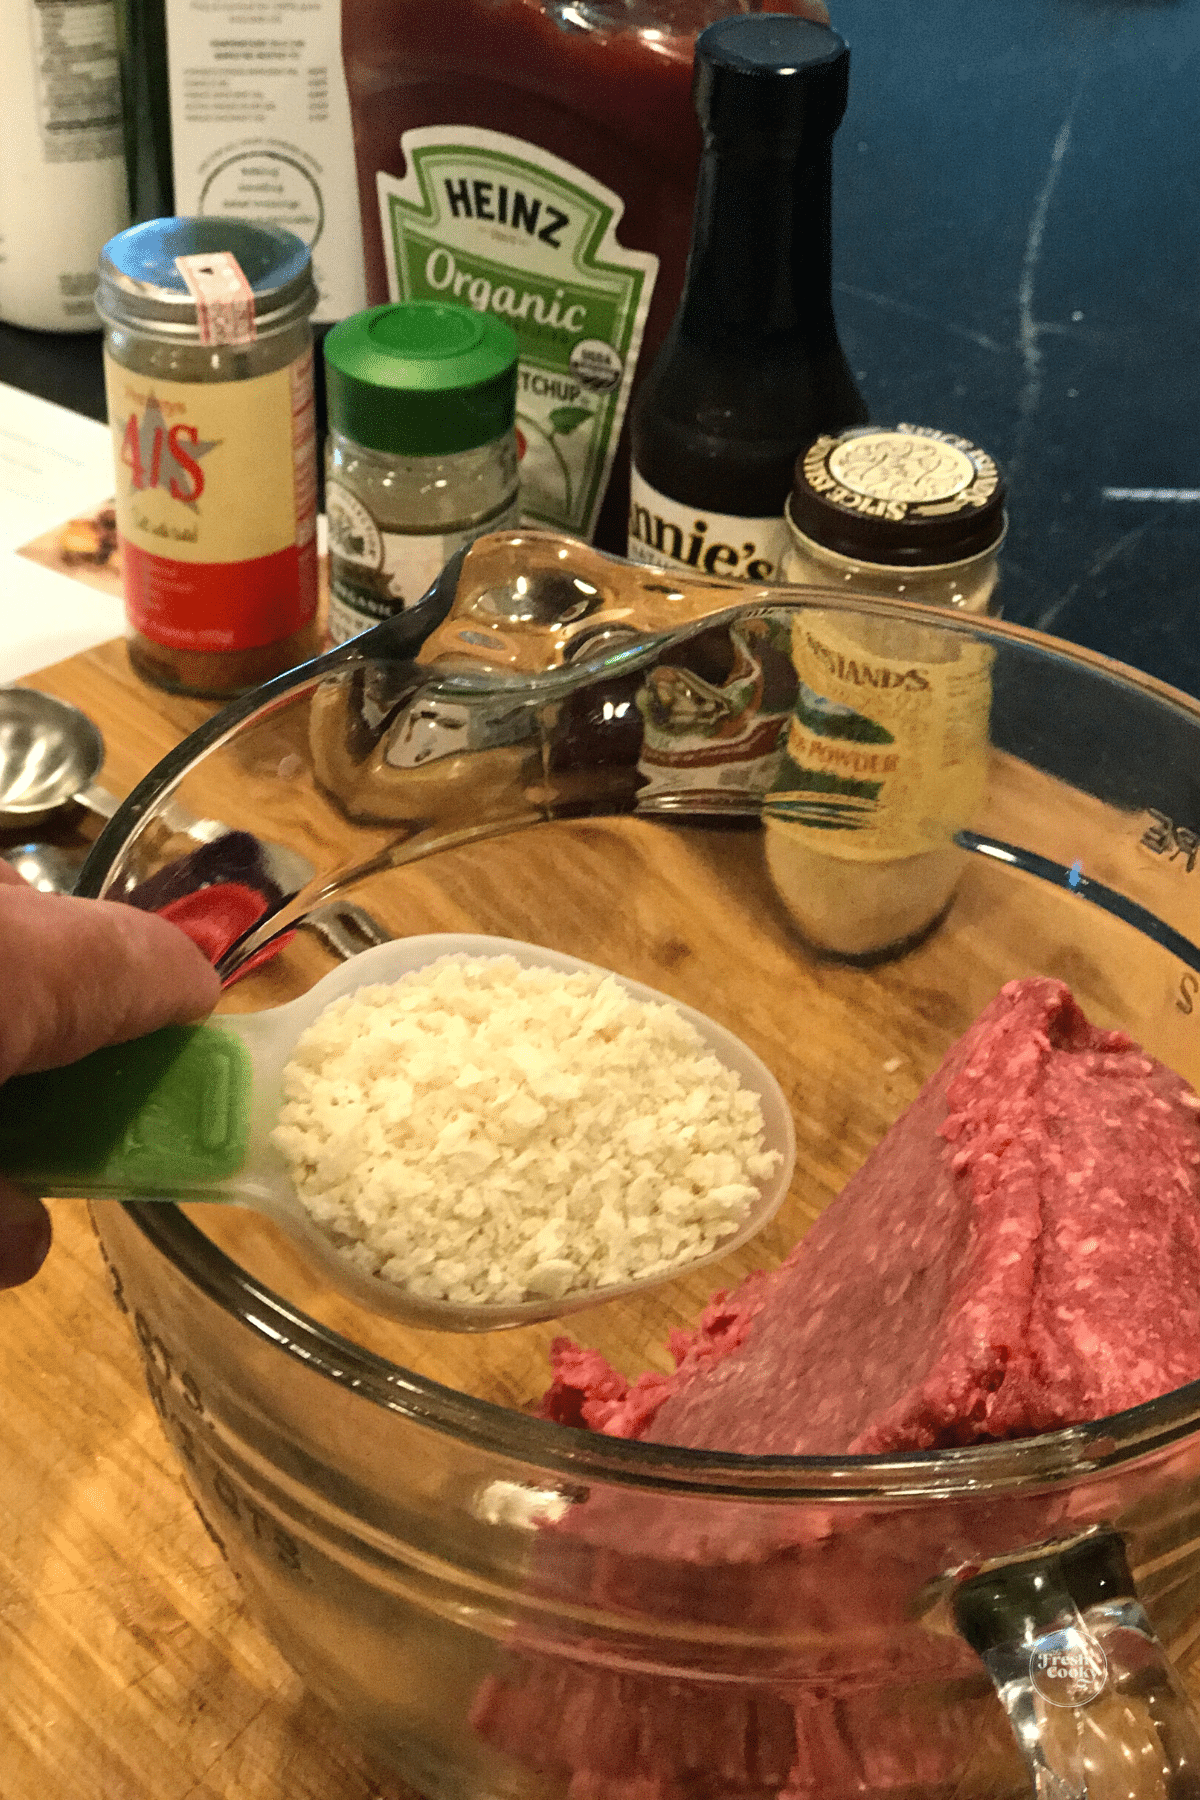 Adding panko to bison meat.